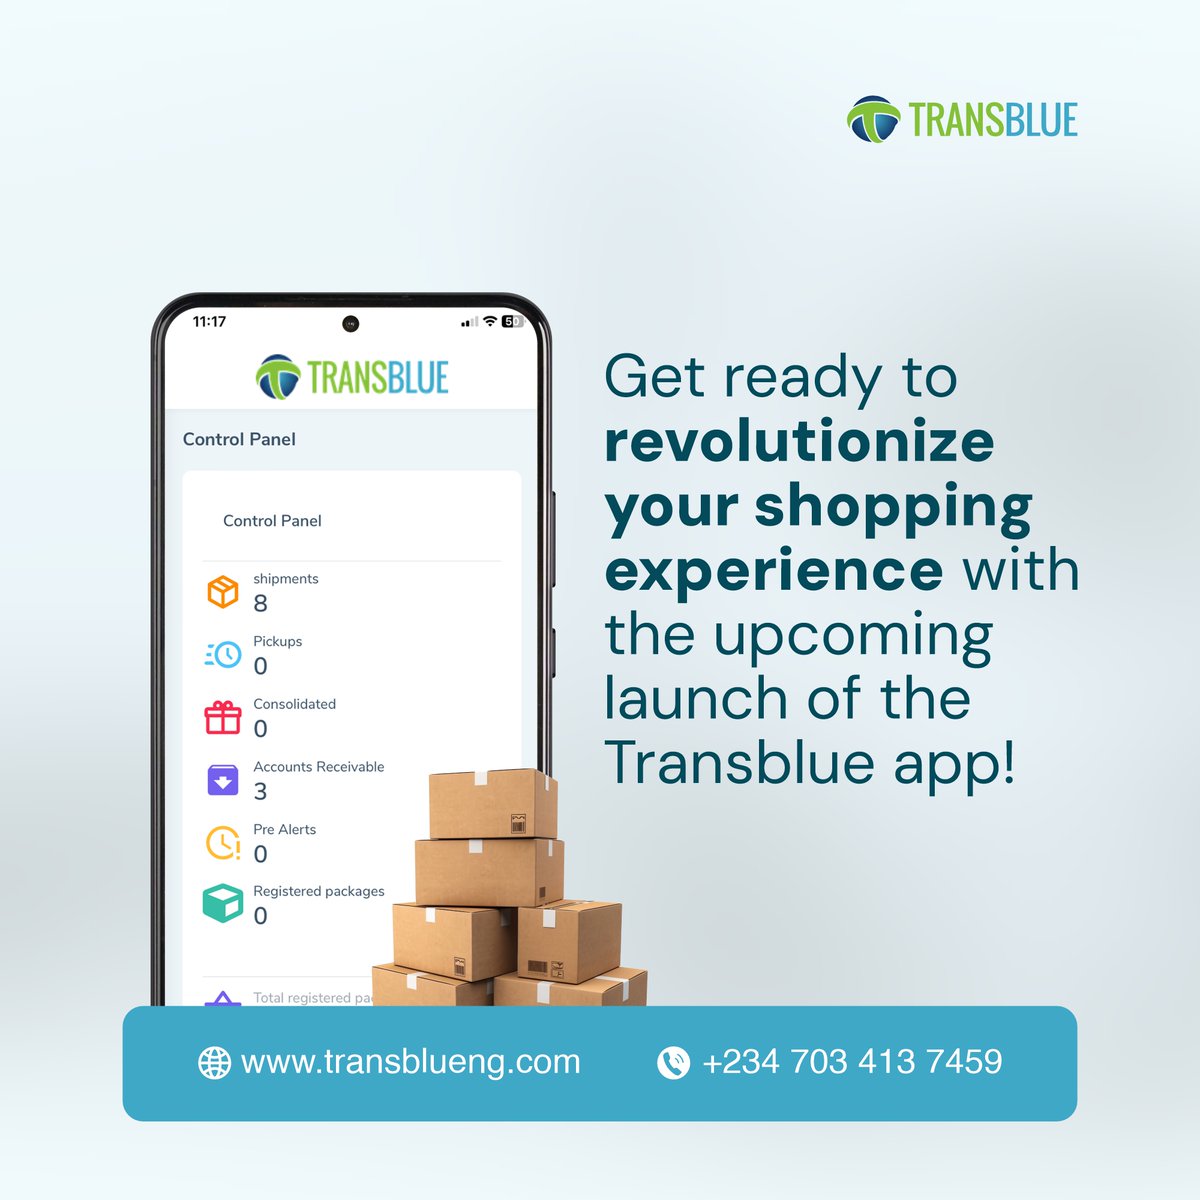 Don't miss out on this game-changing opportunity! Stay tuned for updates and be the first to experience seamless shopping and delivery with Transblue. 
#Transblue #AppLaunch #ComingSoon #ShoppingMadeEasy #DeliverySimplified